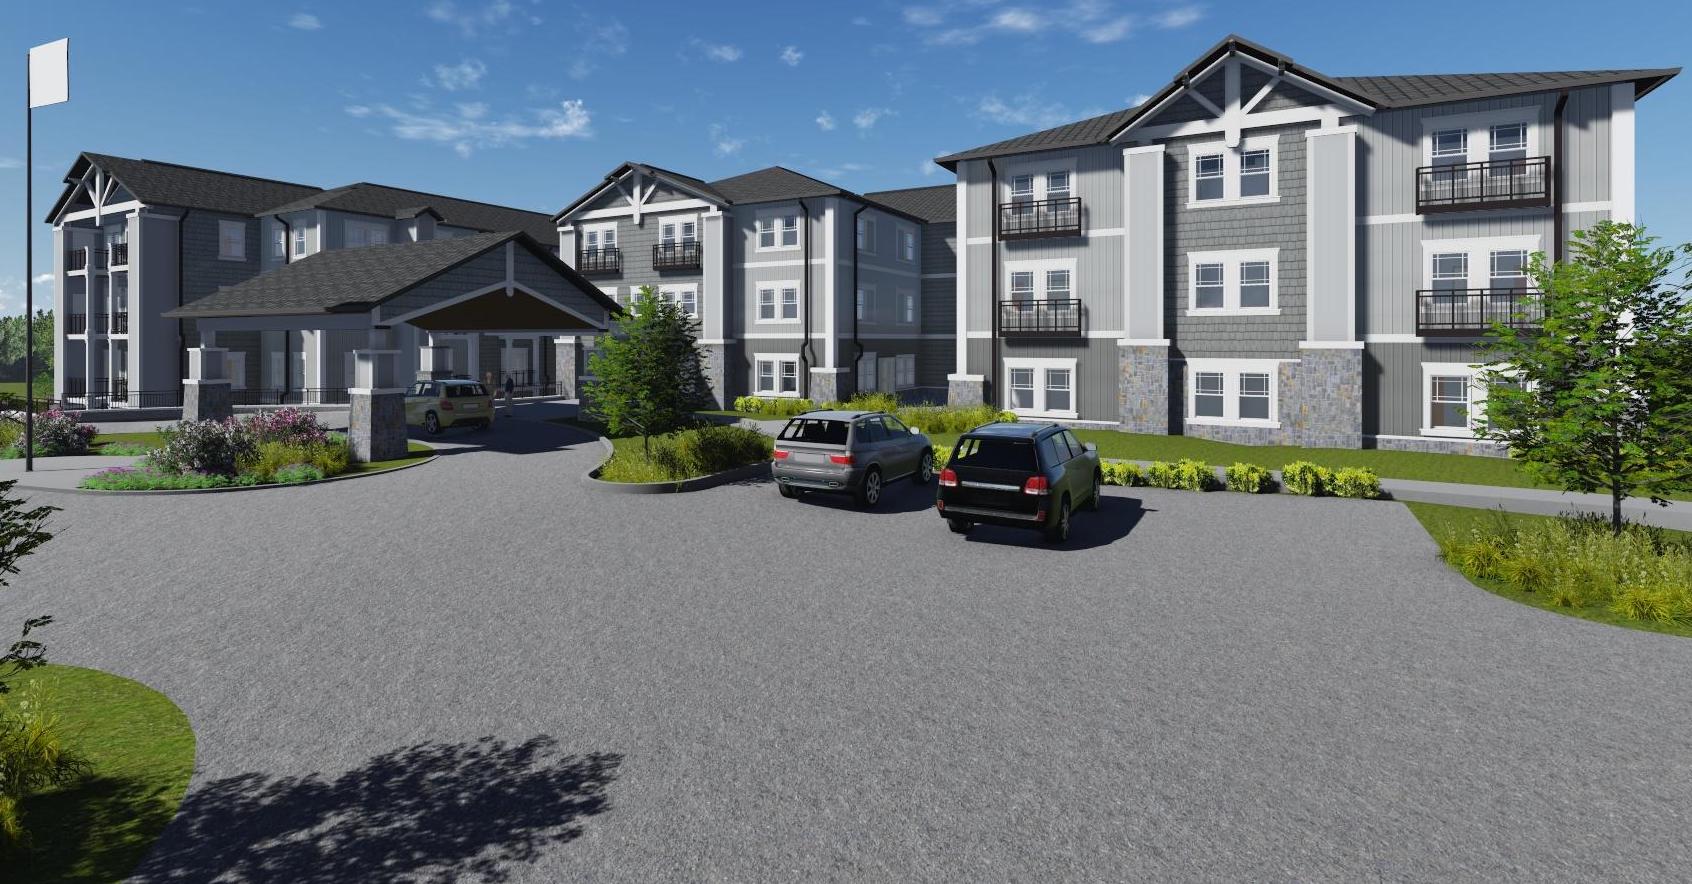 Kirco and Phoenix Senior Living Announce Completion of 137-Unit The Bluffs at Greystone Senior Living Community in Birmingham